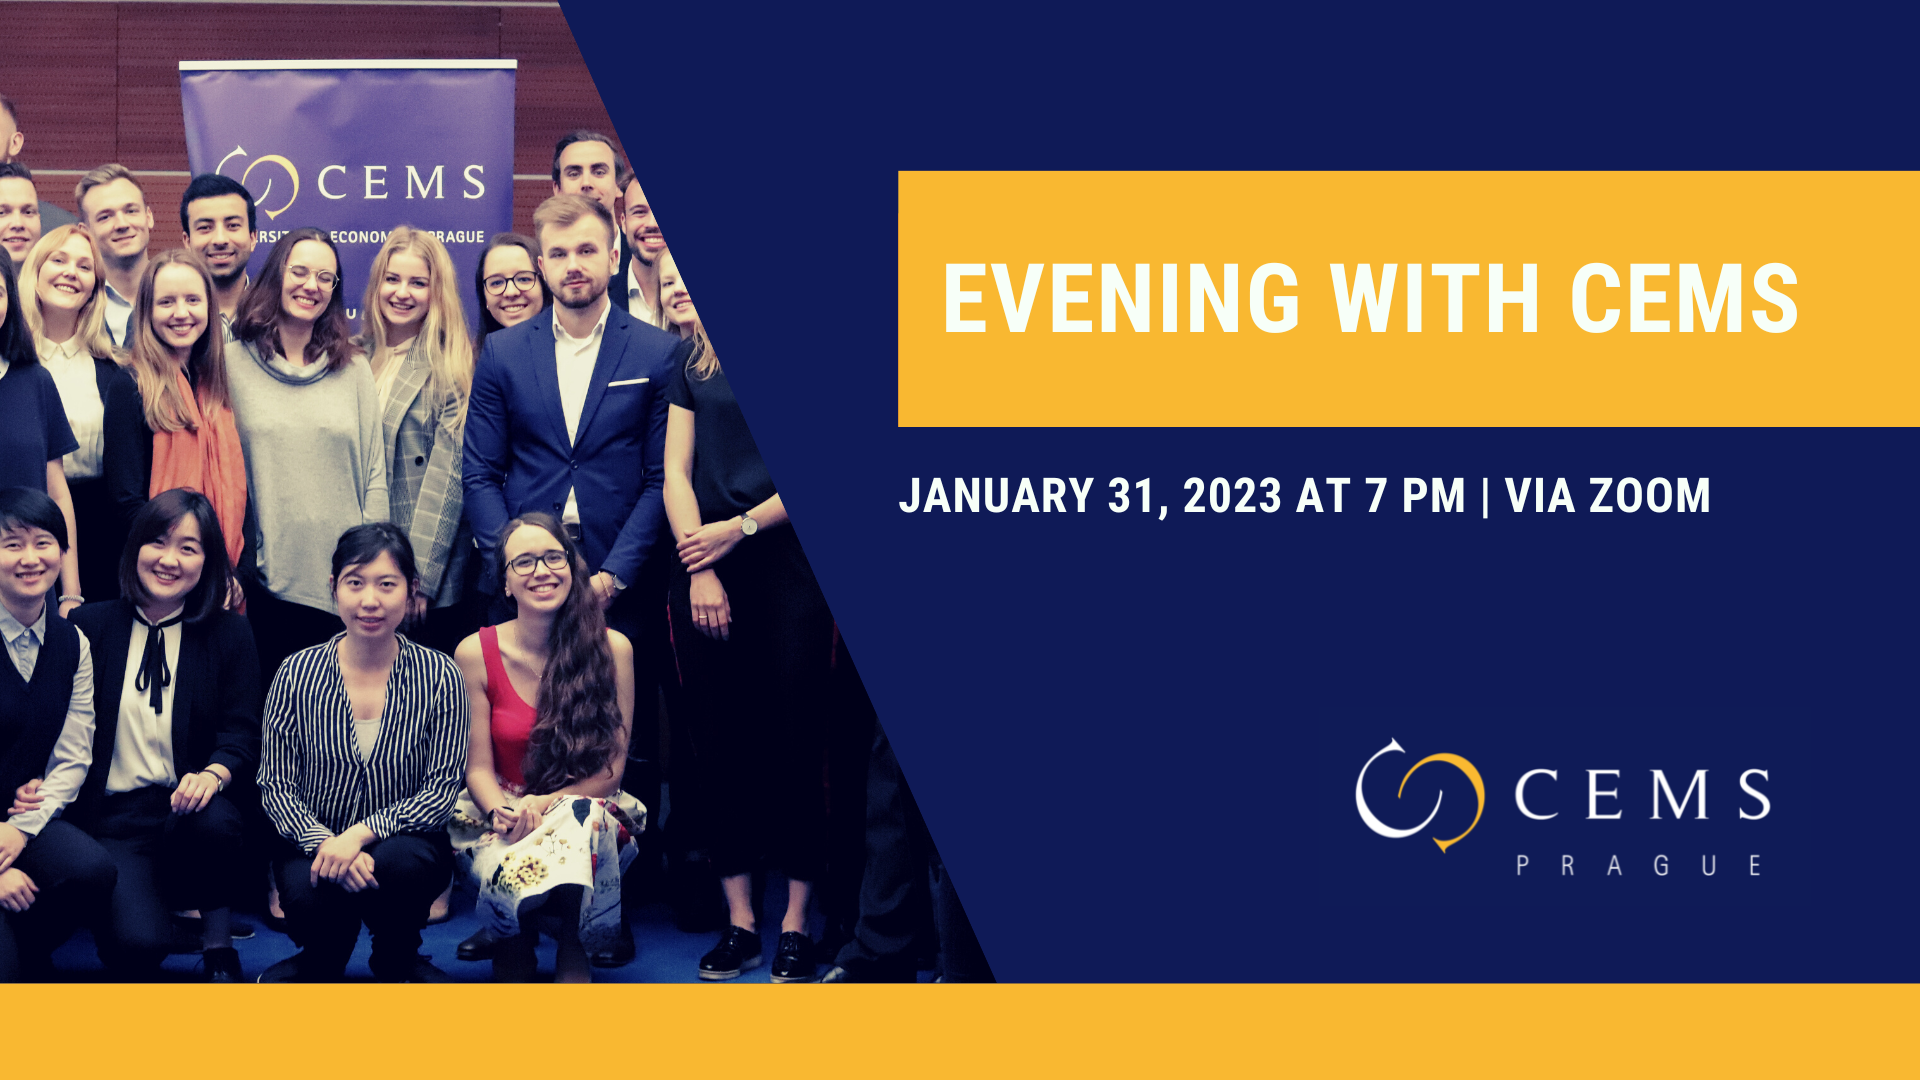 Interested in CEMS? Join Us for Evening with CEMS /January 31, 2023/